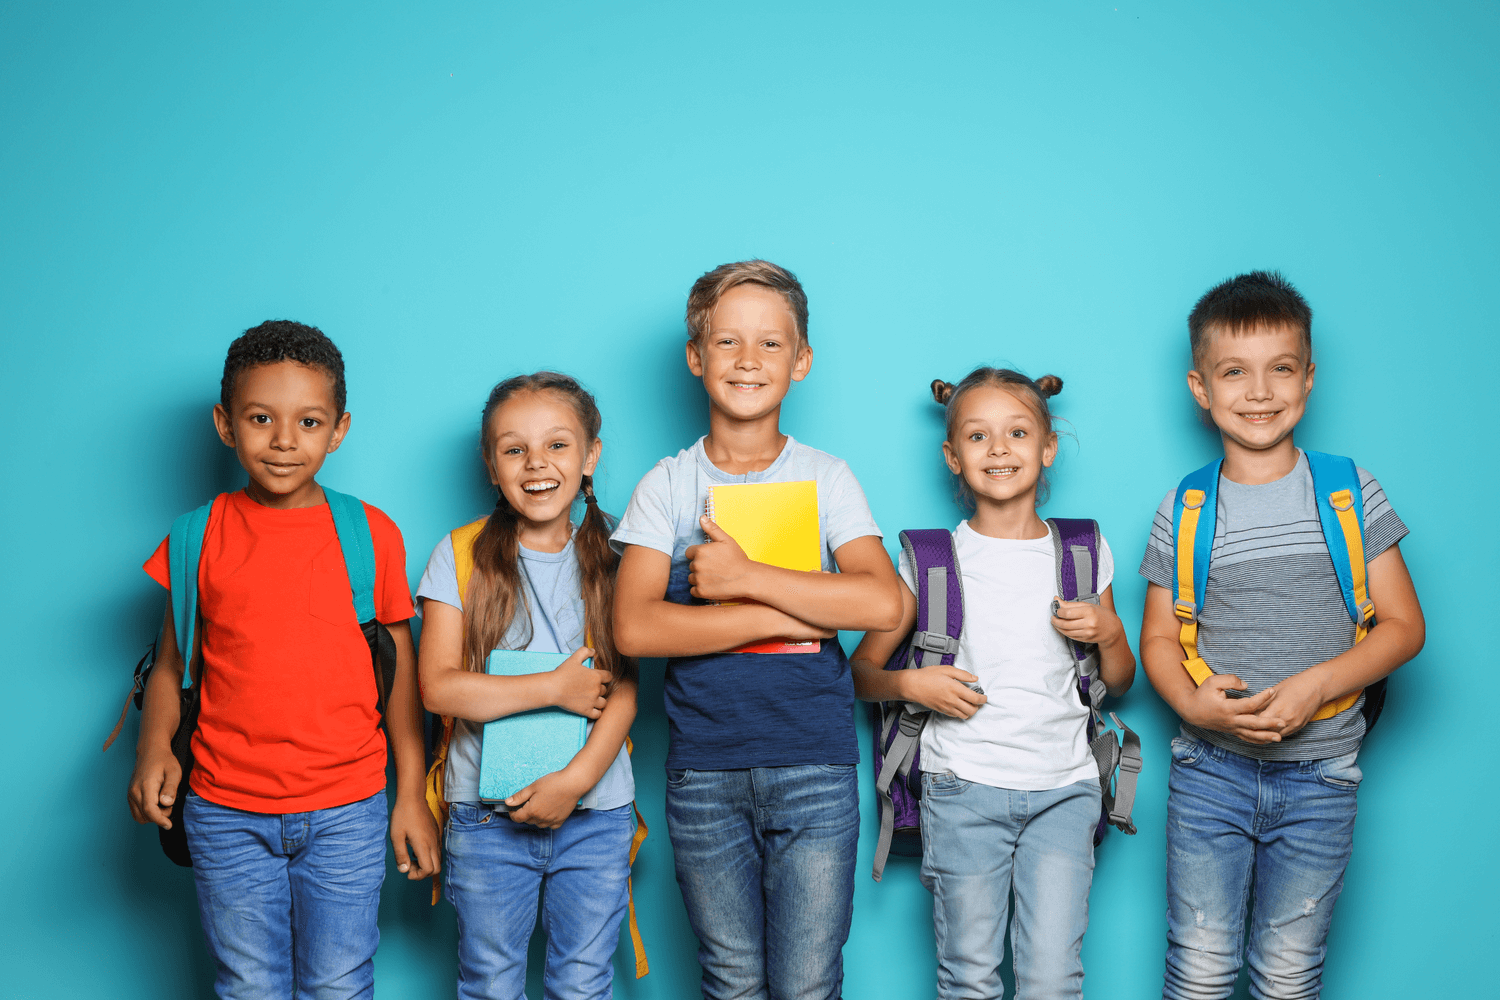 A group of kids standing in front of a blue wall, while smiling to show their healthy teeth, thanks to pediatric dentistry.